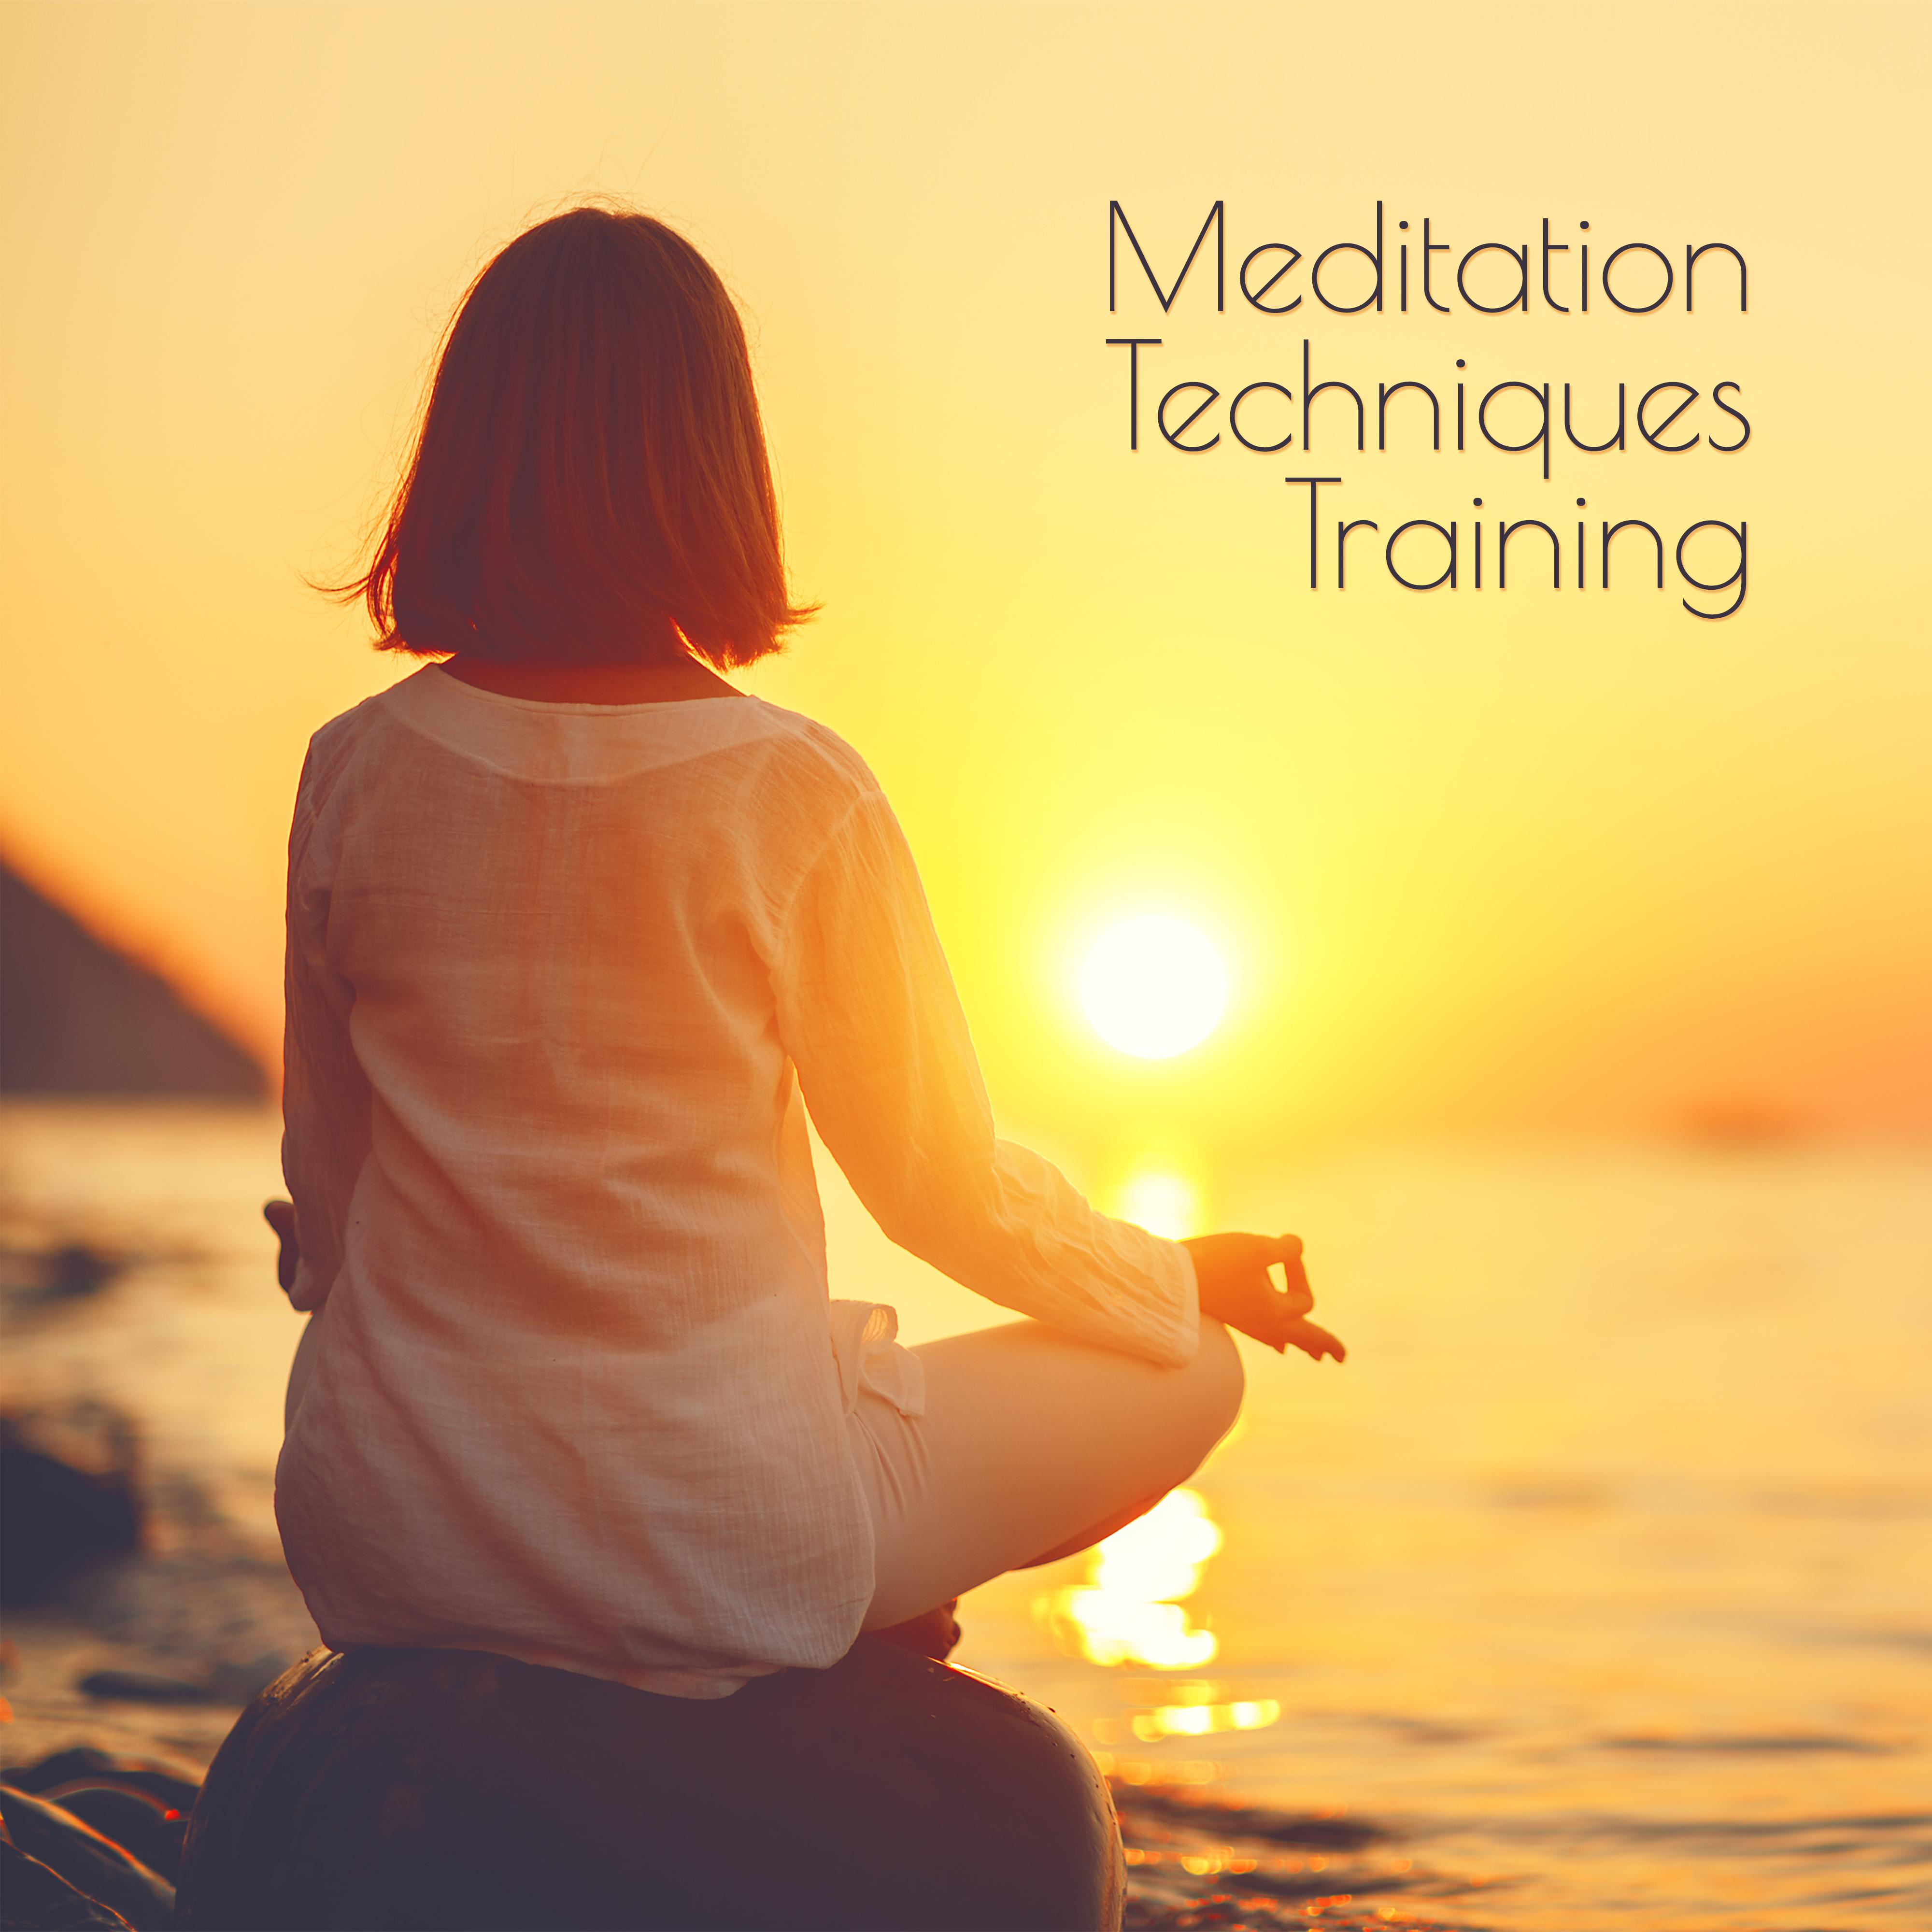 Meditation Techniques Training  15 New Age Tracks for Yoga Training, Pure Relaxing  Calming Down